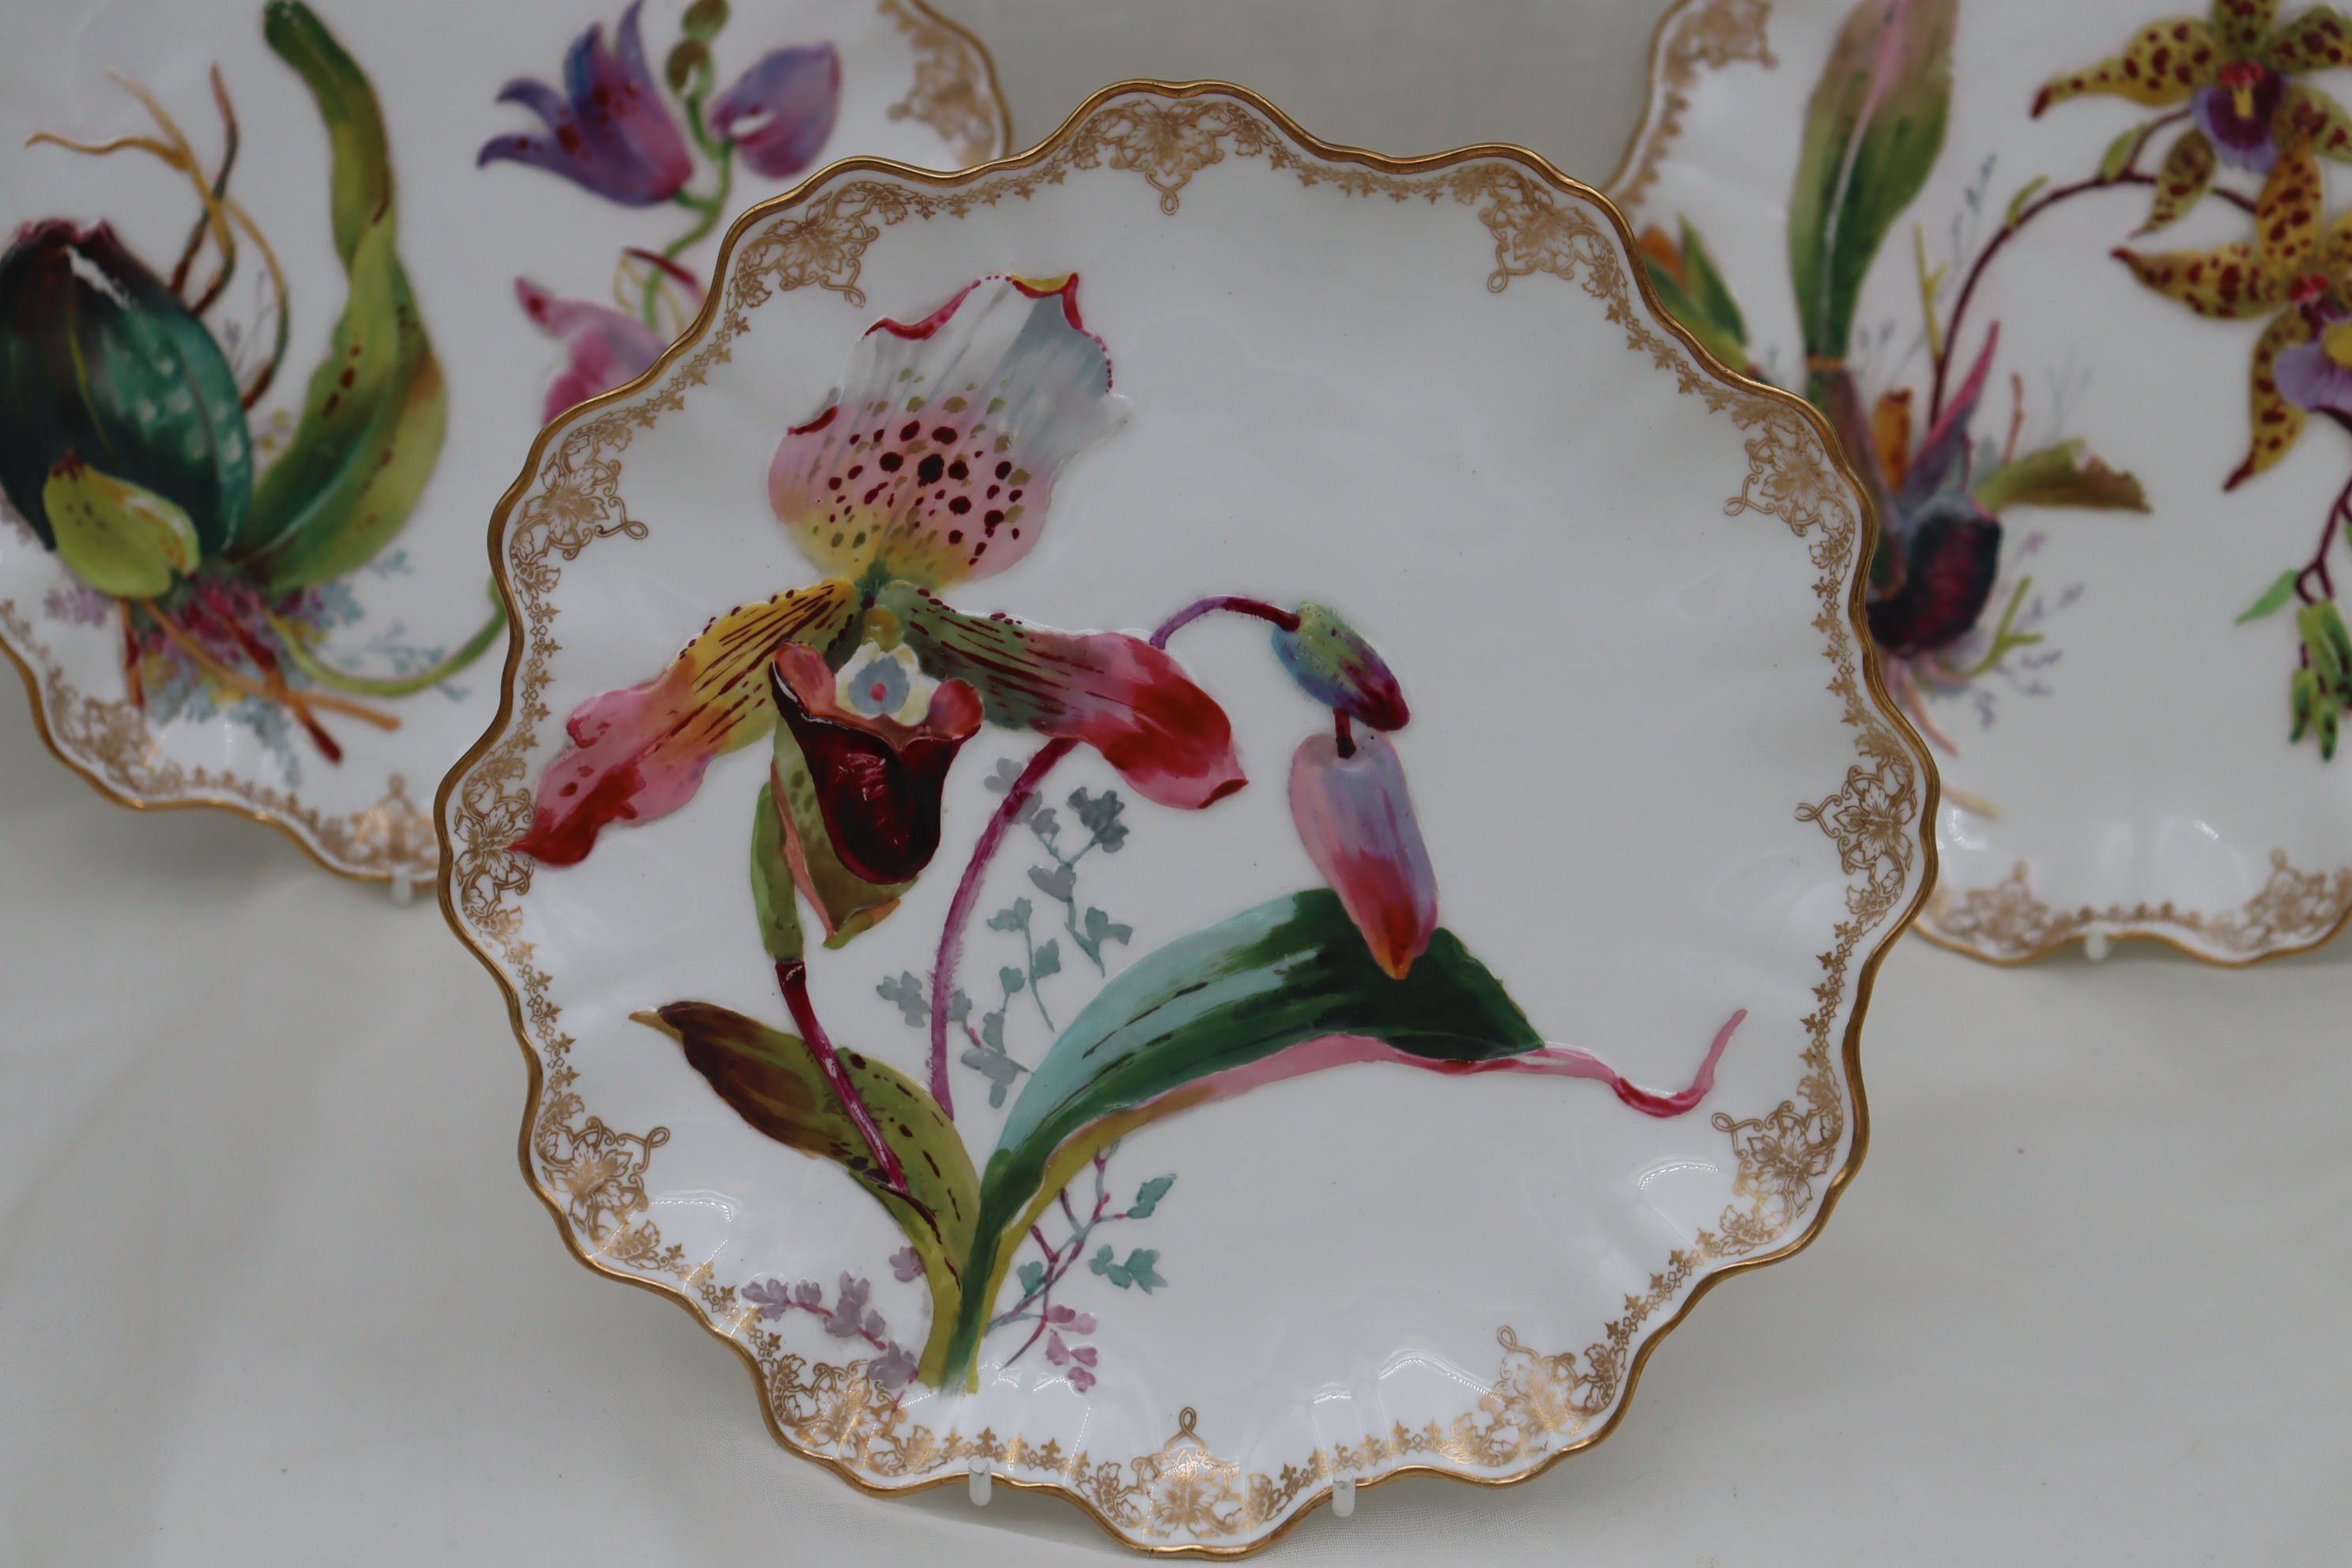 This Doulton Burslem part dessert set comprises six plates and a low comport. All pieces feature raised, moulded depictions of a variety of orchids which have been hand coloured and sit nicely against the white porcelain body. The scalloped rim has